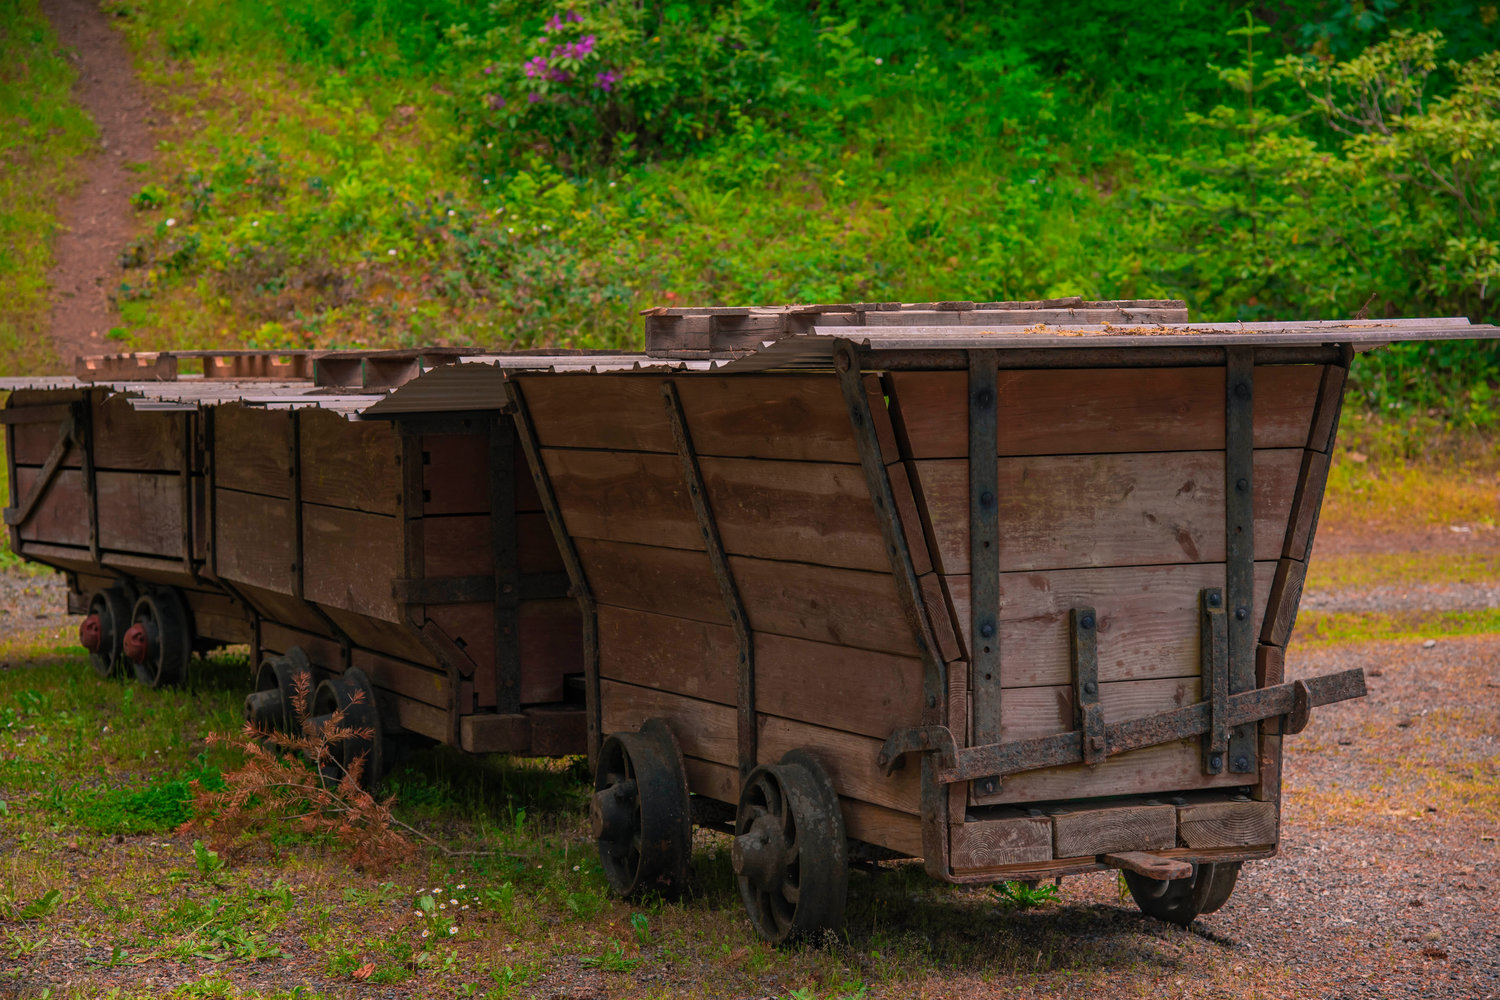 Mine carts sit on display outside the Tenino Depot Museum on Tuesday.